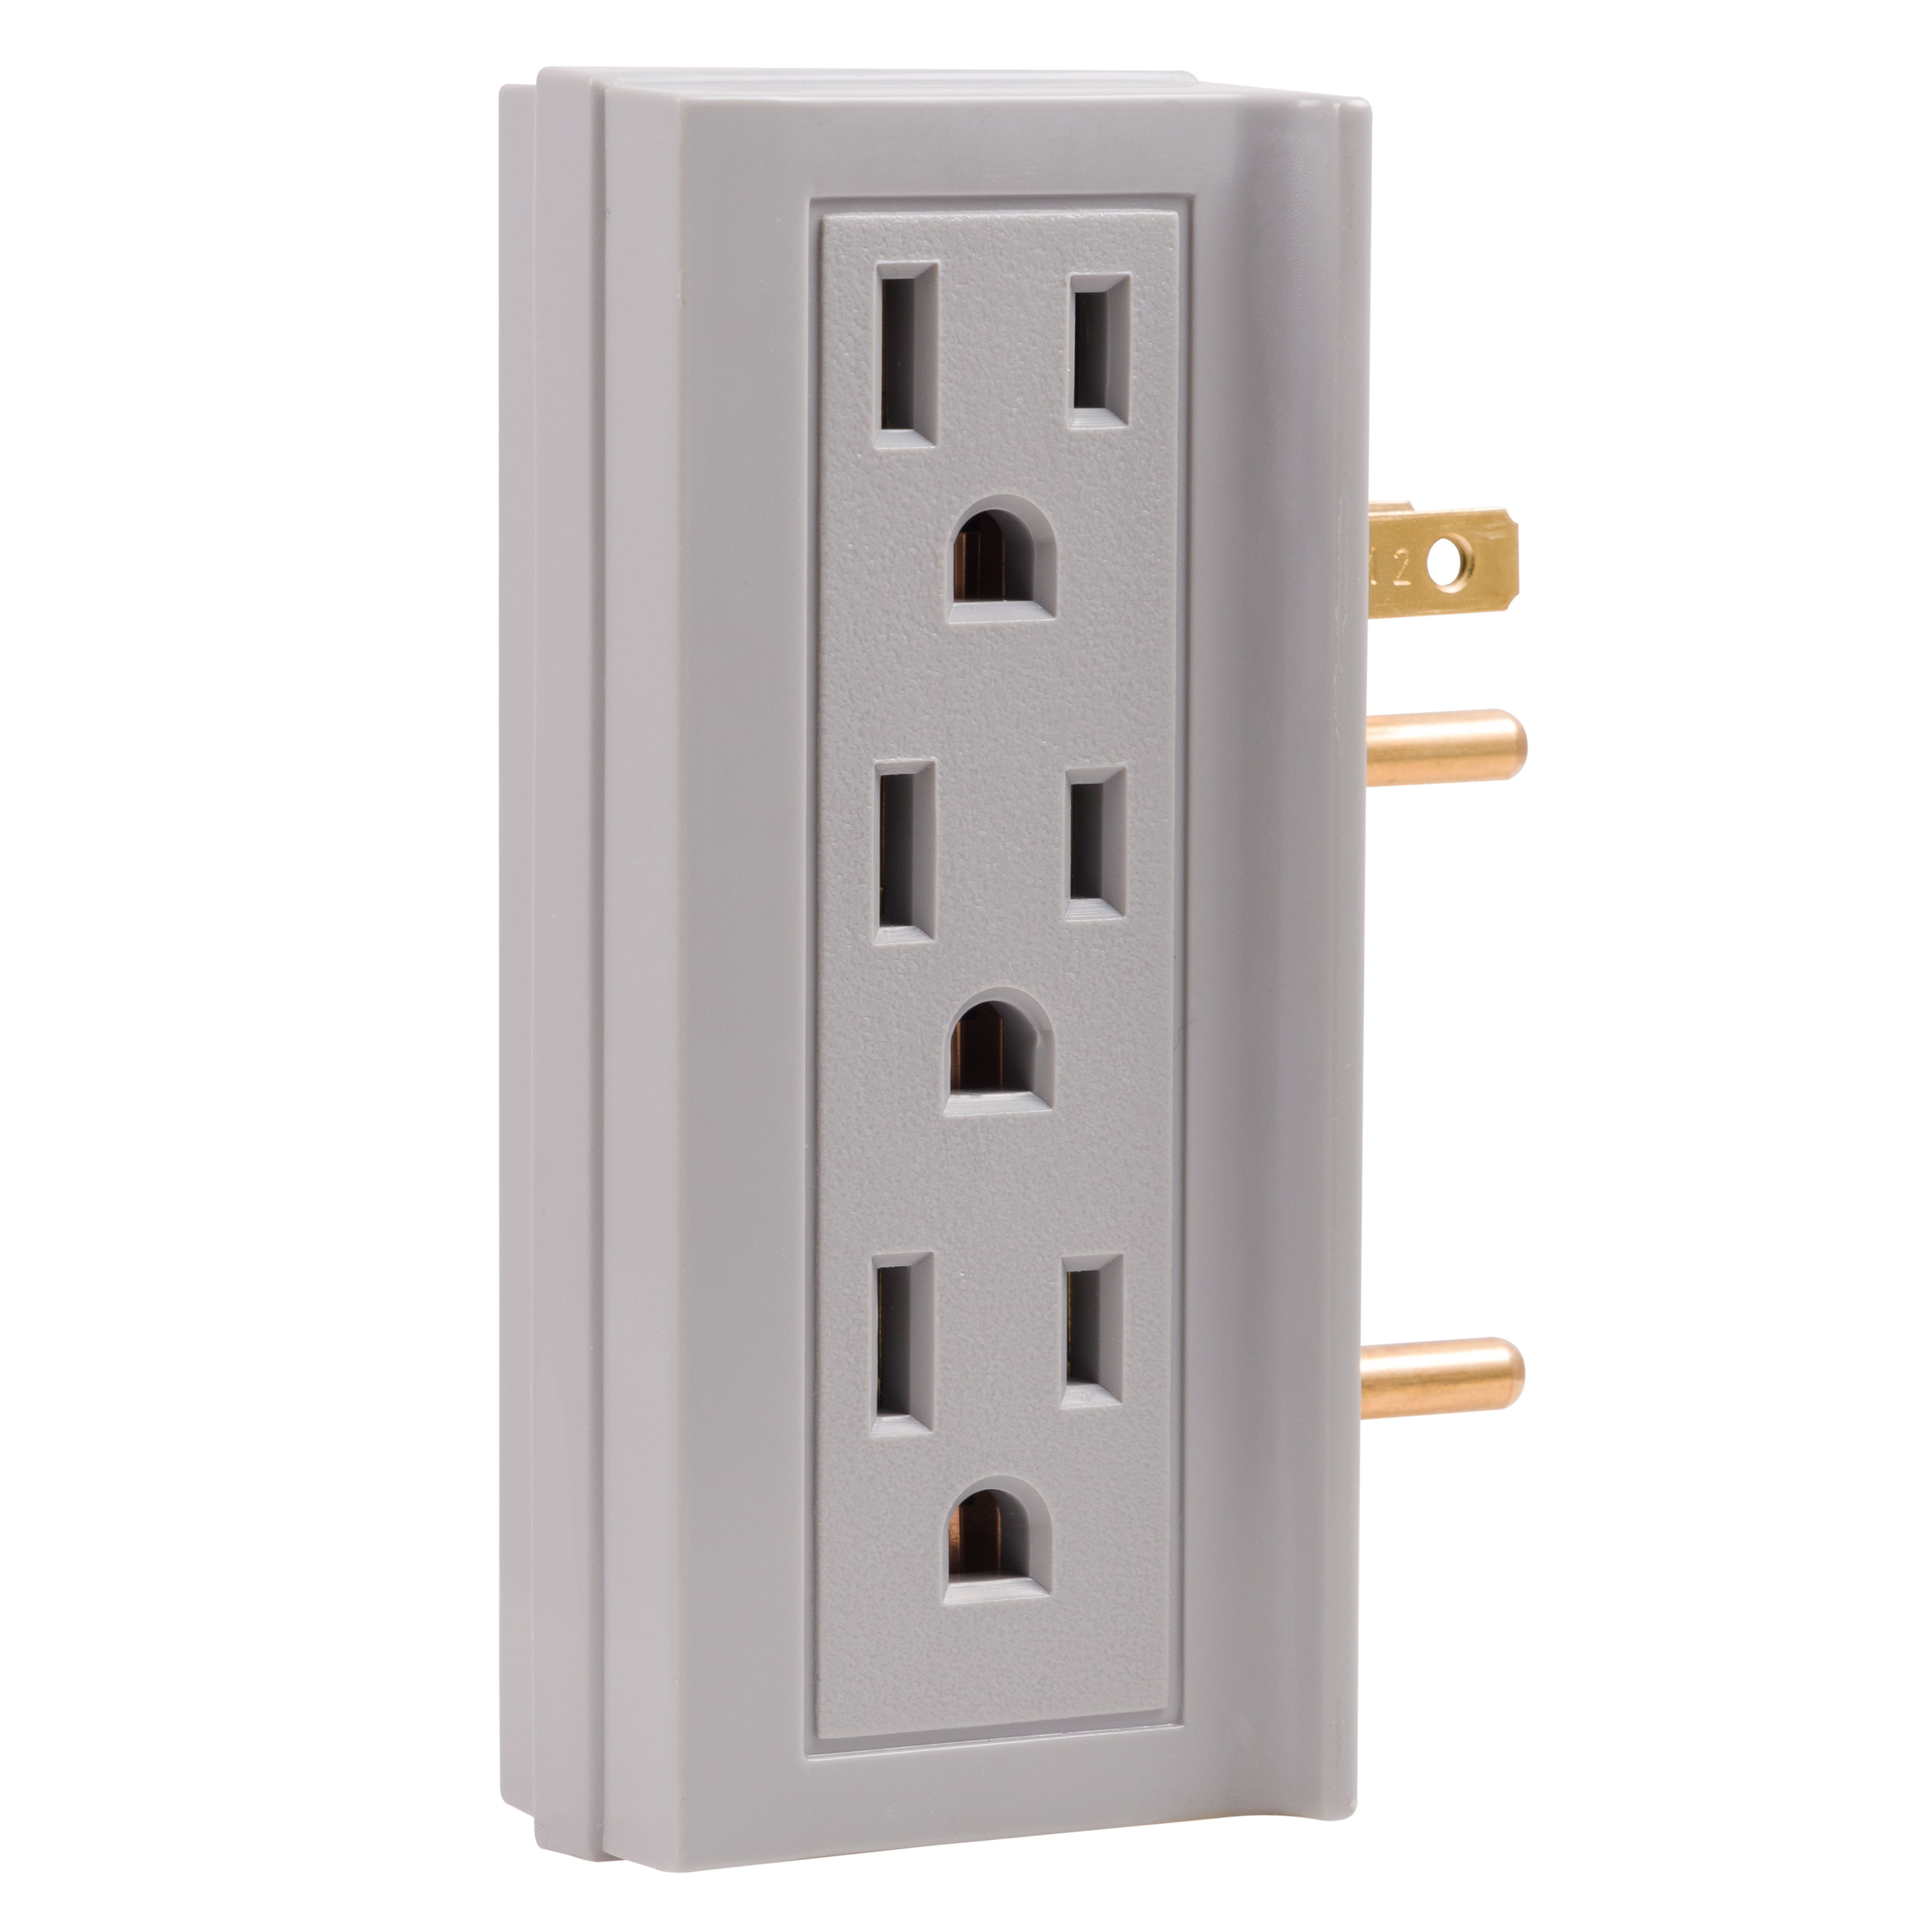 IIT 26860 Cord Protector 6 Outlet Wall Tap Splitter UL-Listed, Side Entry 